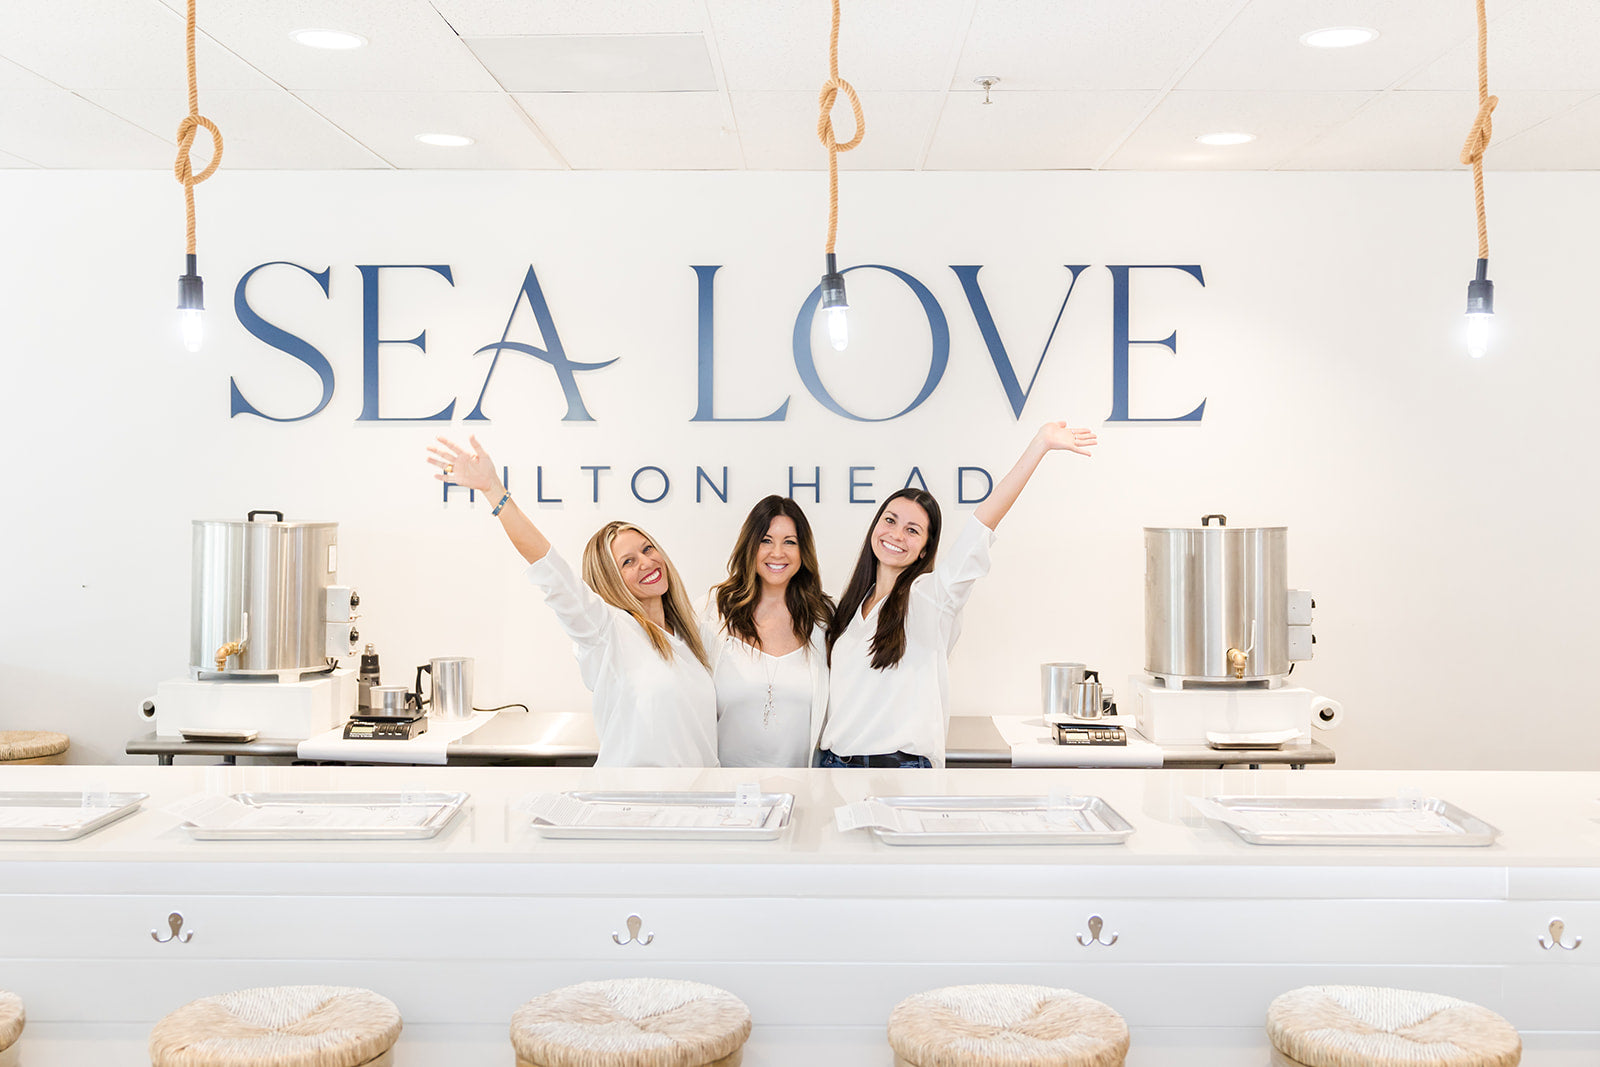 Three cheerful individuals standing behind an ice cream counter at "sea love hilton head," with arms raised in a welcoming gesture.